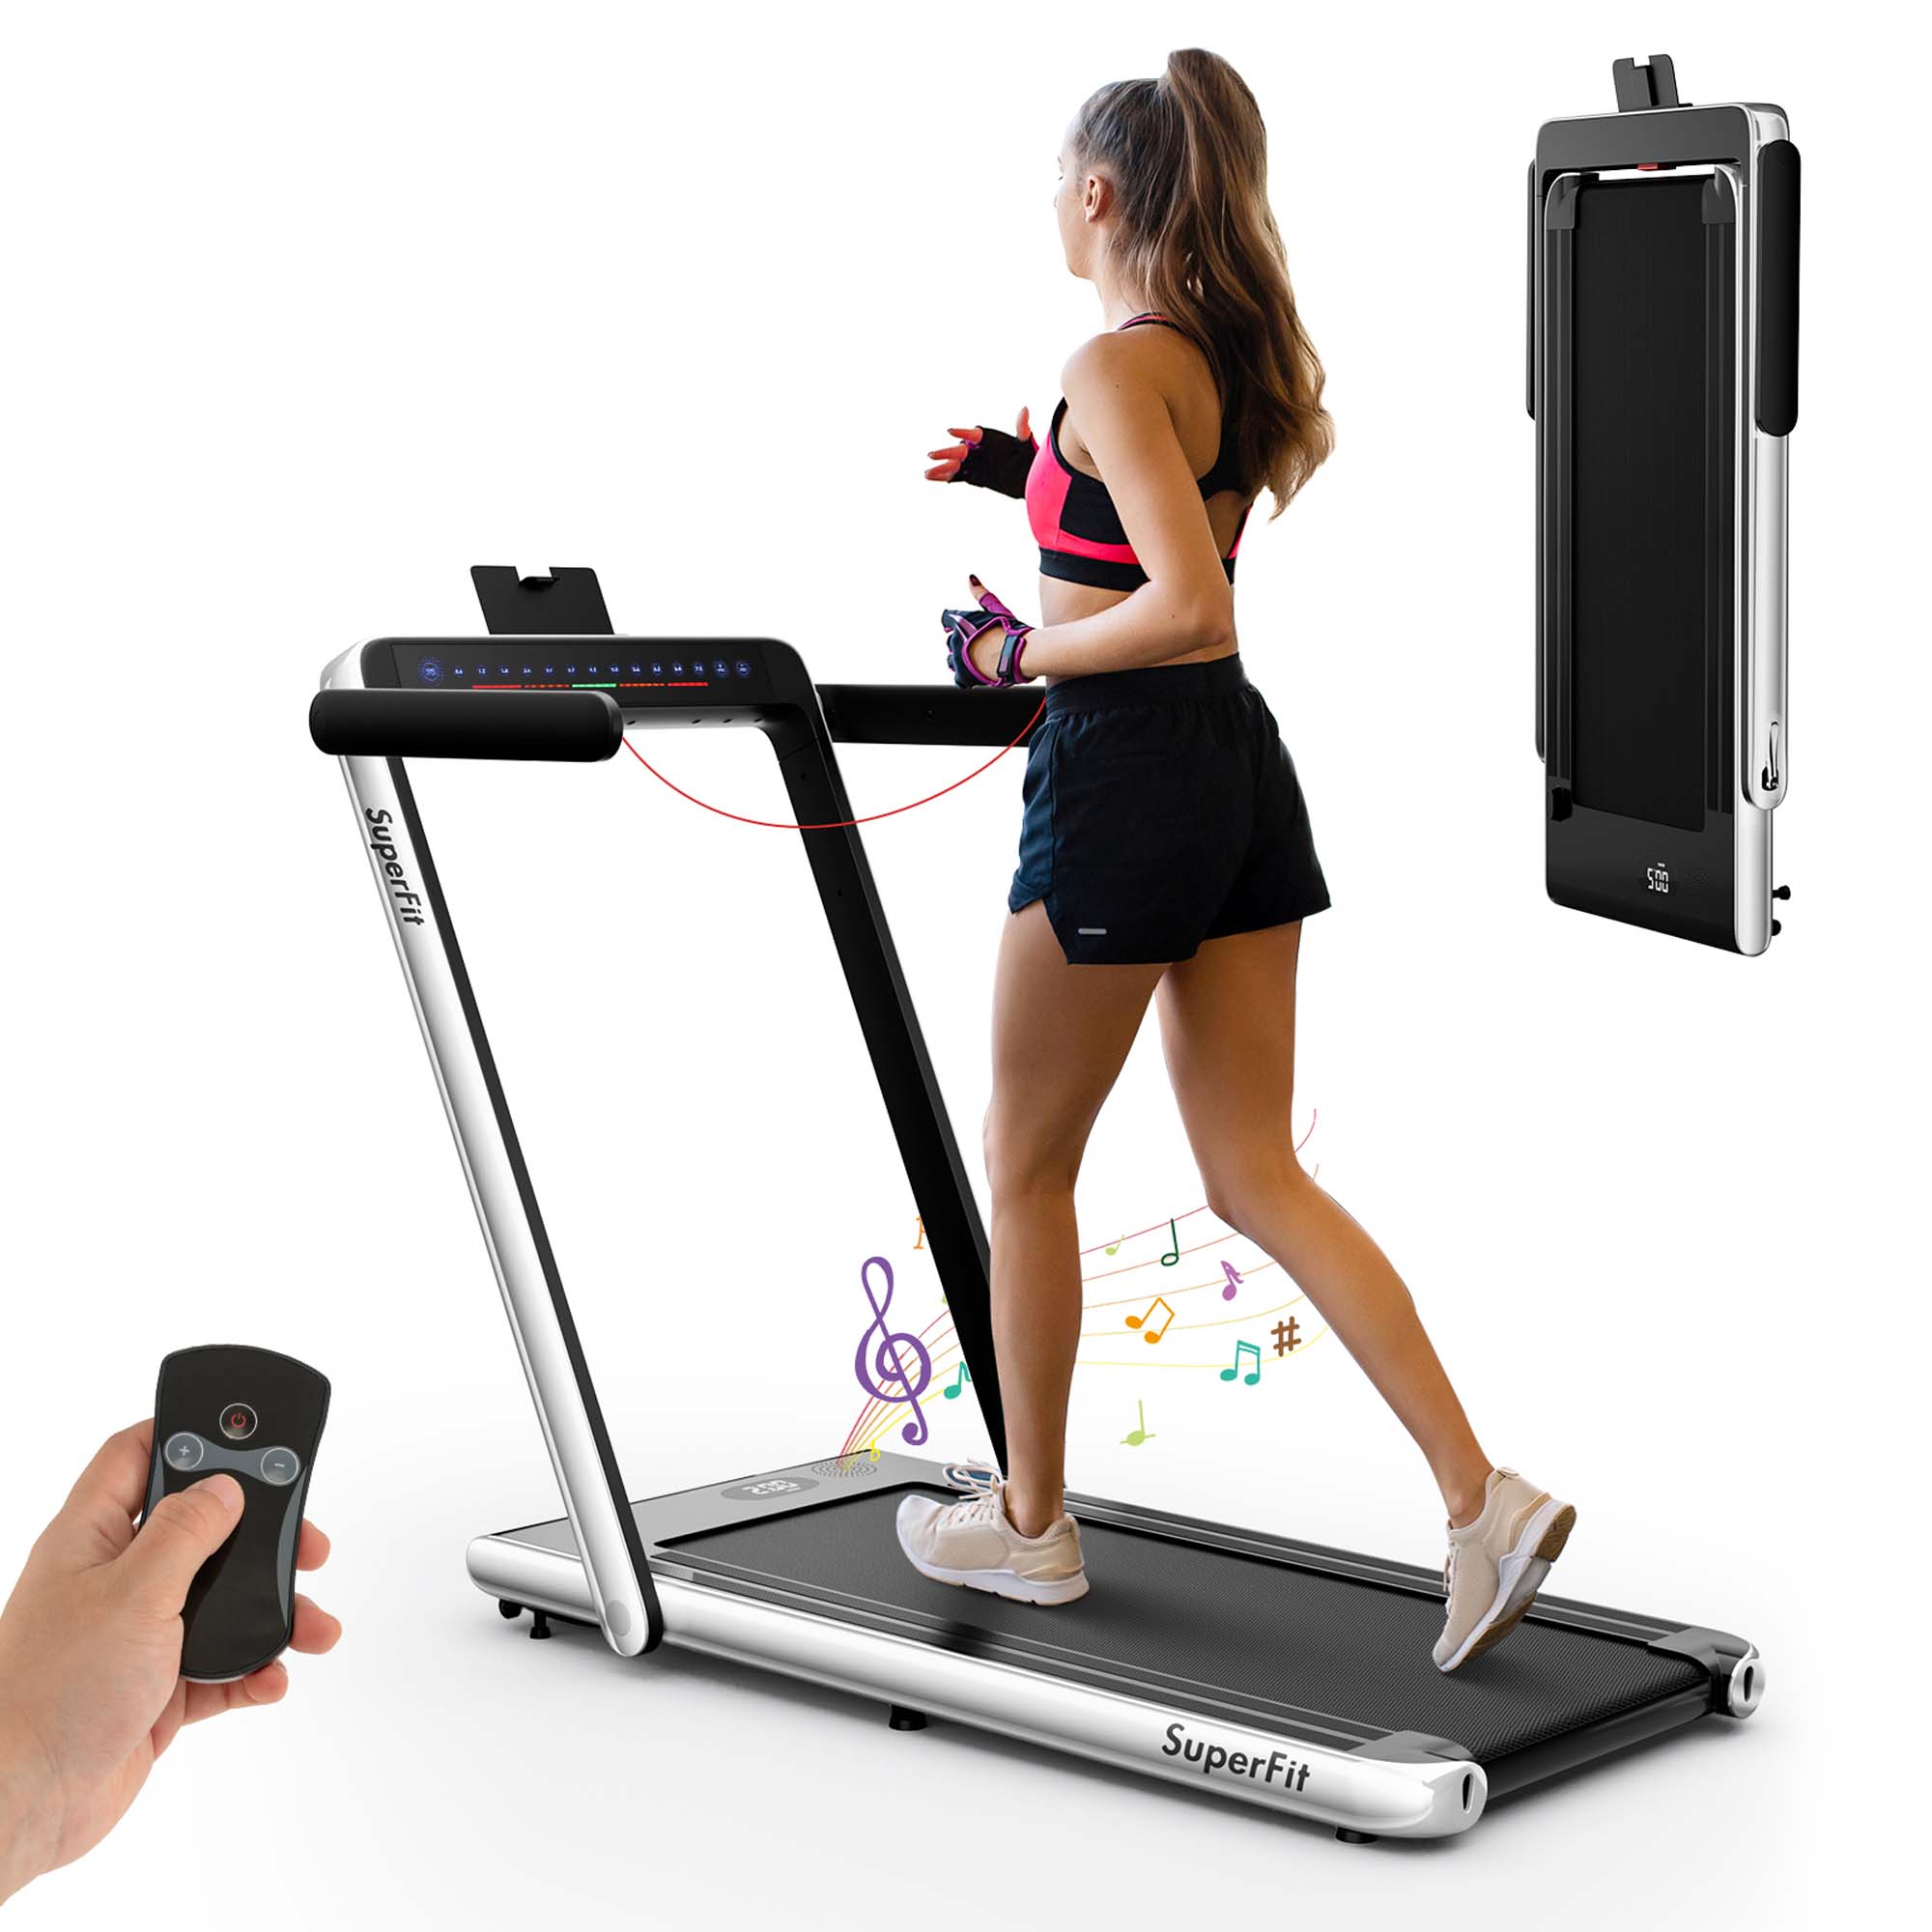 SuperFit Up To 7.5MPH 2.25HP 2 in 1 Dual Display Screen Treadmill Jogging Machine W/APP Control Silver - image 1 of 7